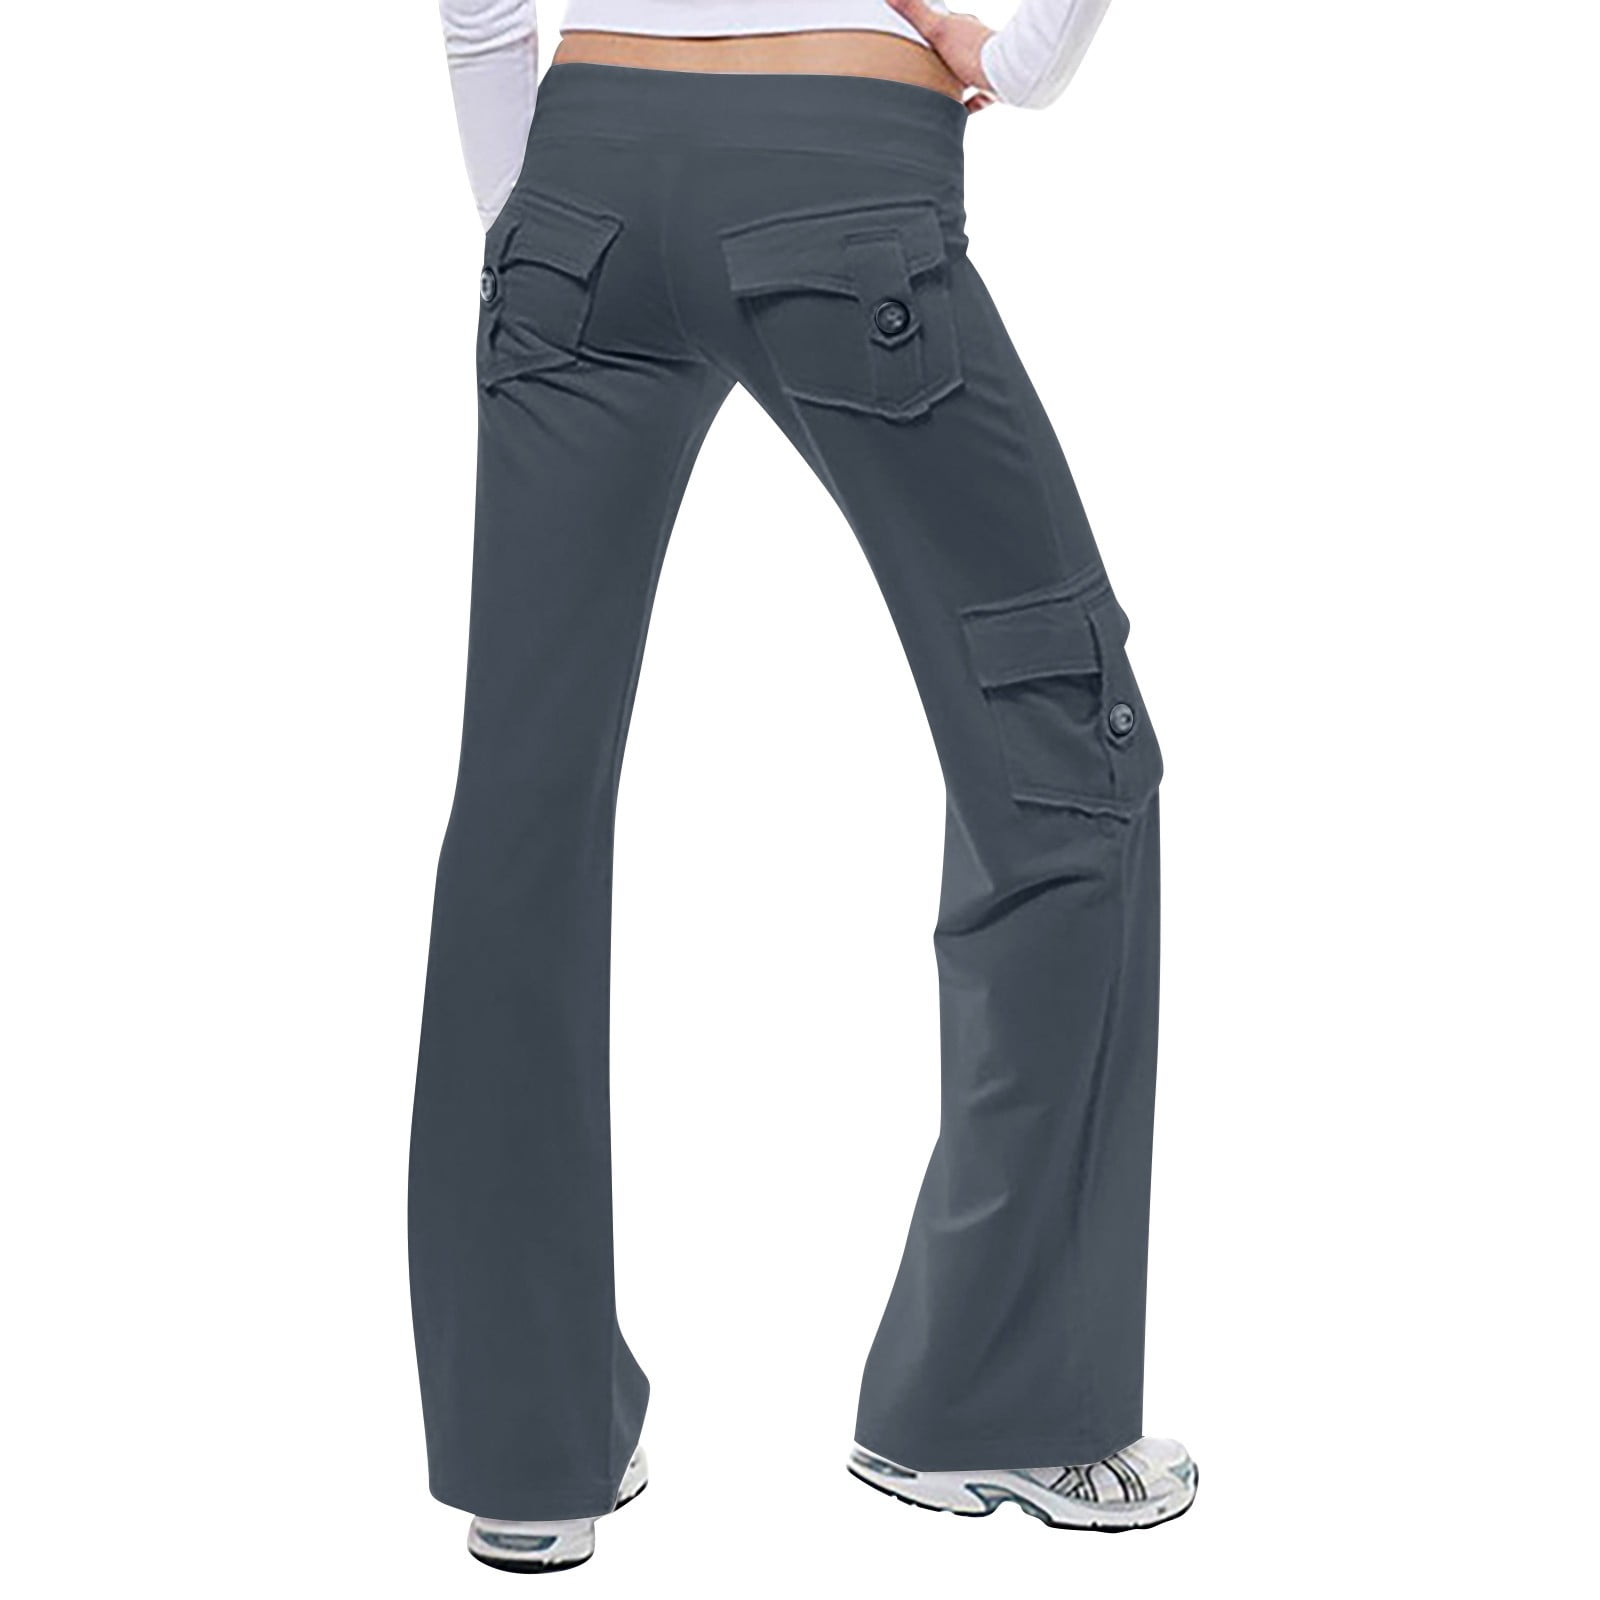 Yoga Pants with Pockets for Women Bootcut High Waist Workout